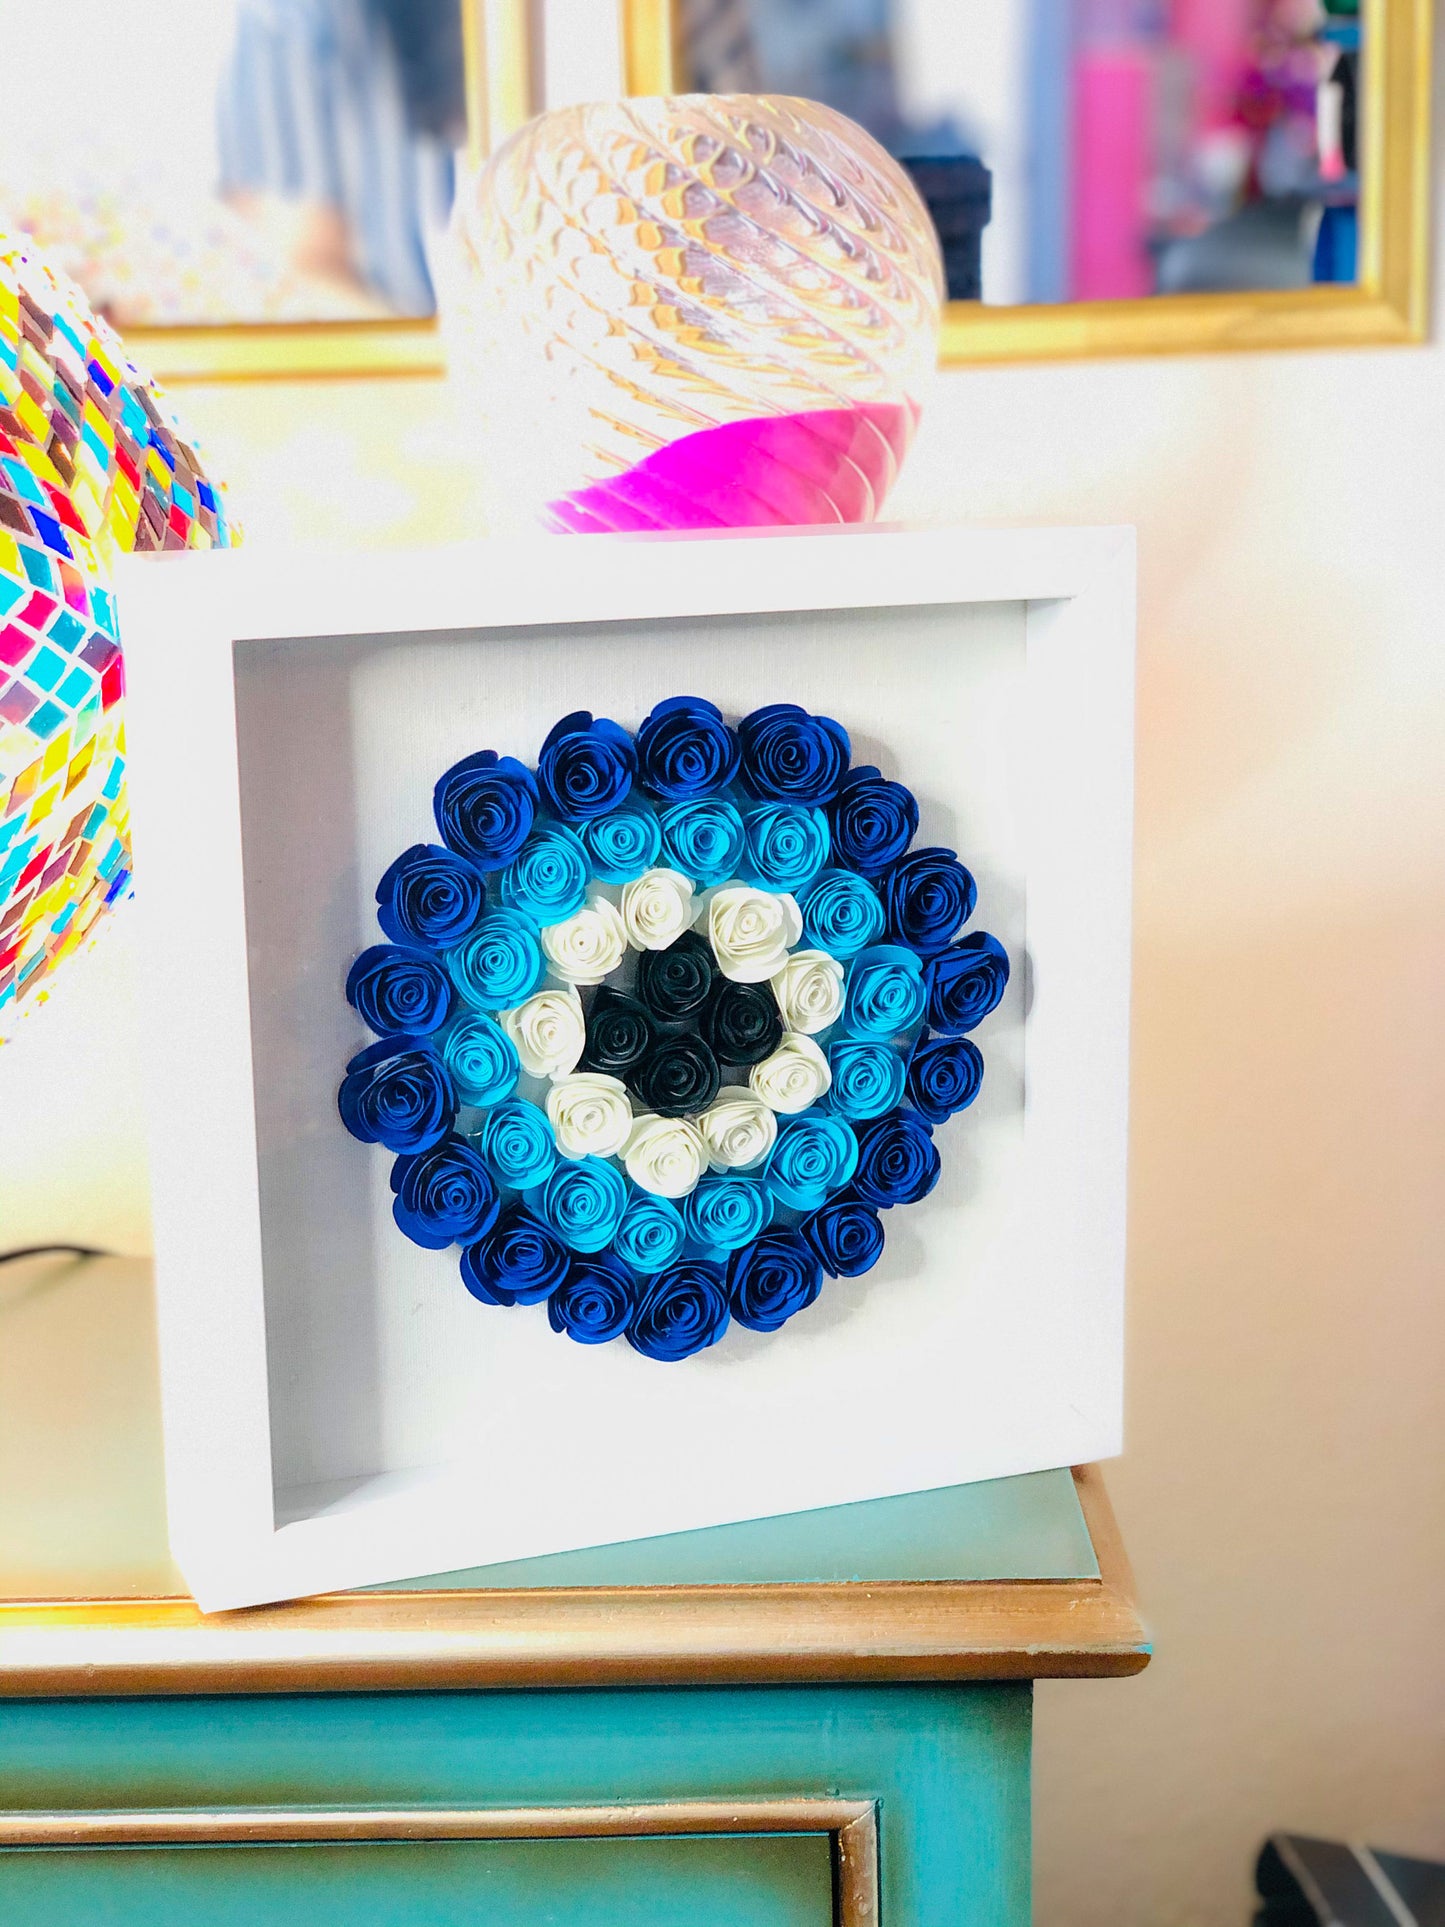 Evil Eye Design Shadow Box Personalized Your Text Framed